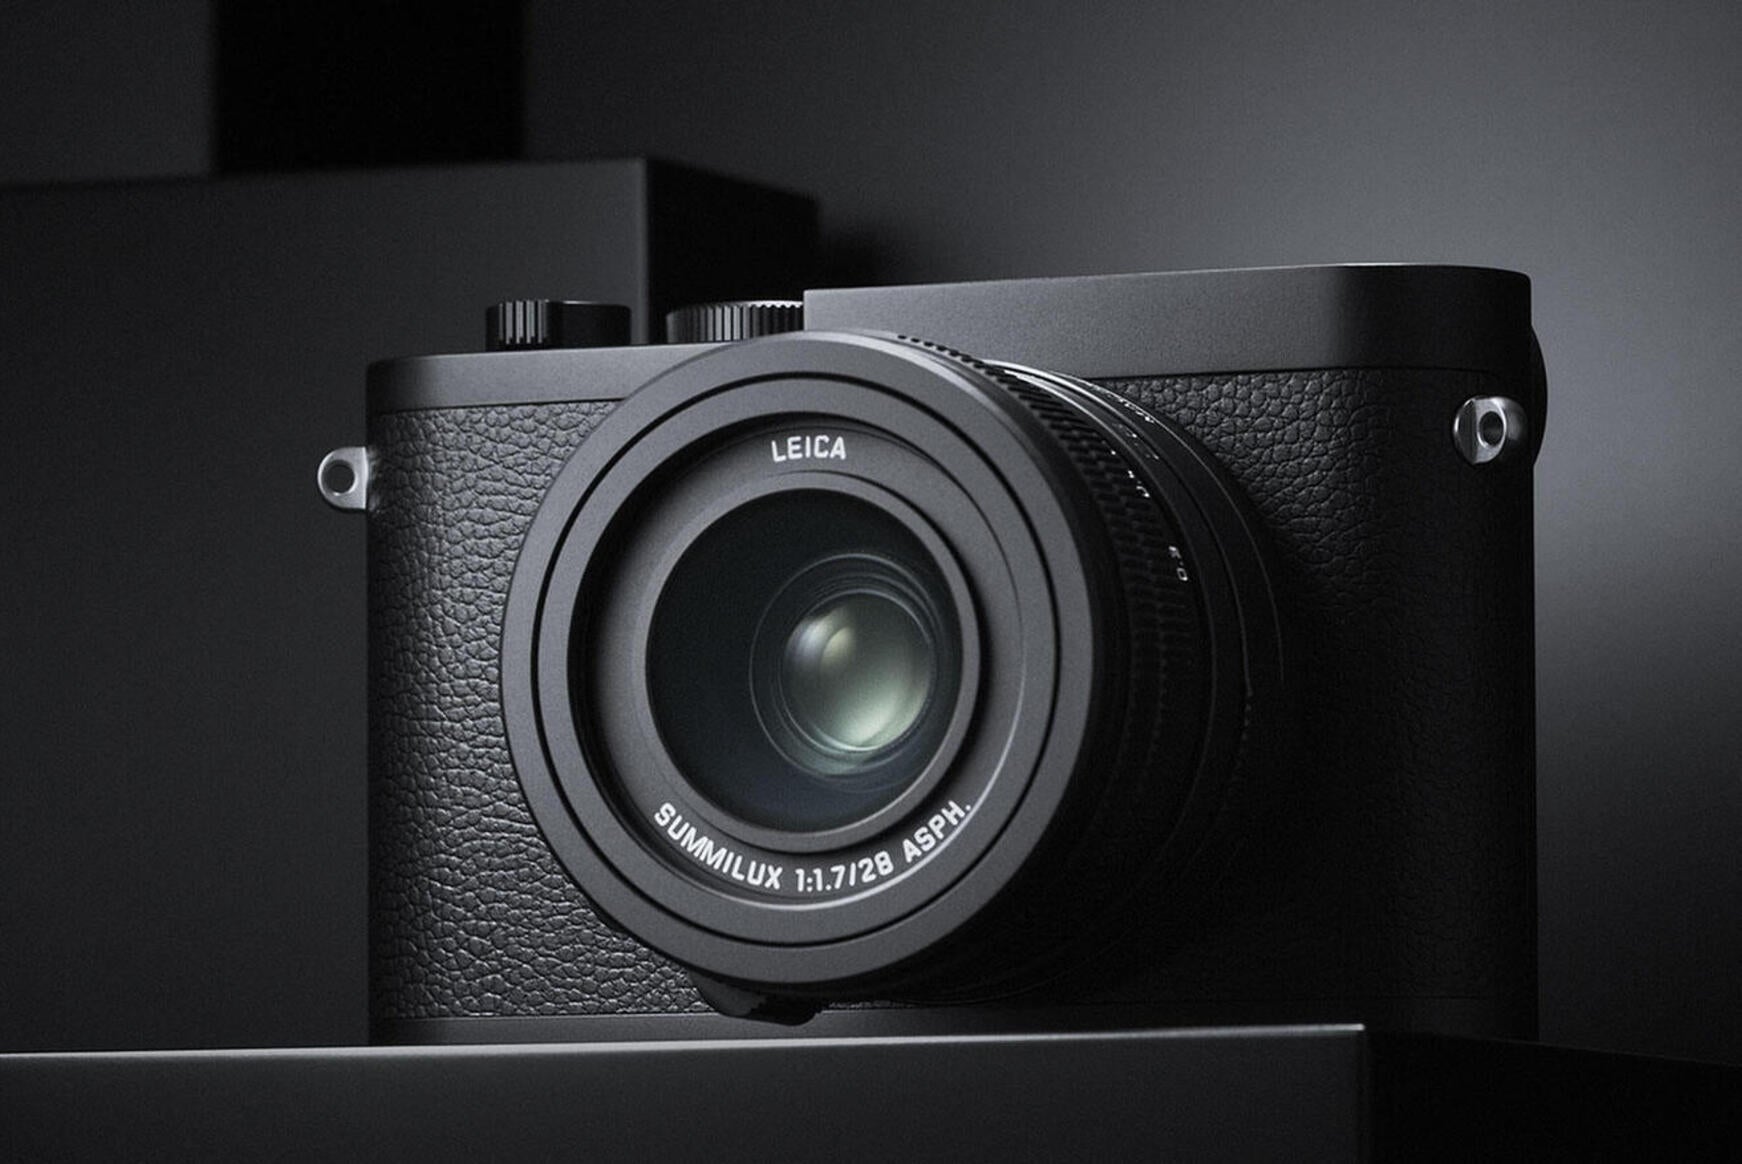 The Leica Q2 Monochrom has a fixed 28mm f/1.7 lens.